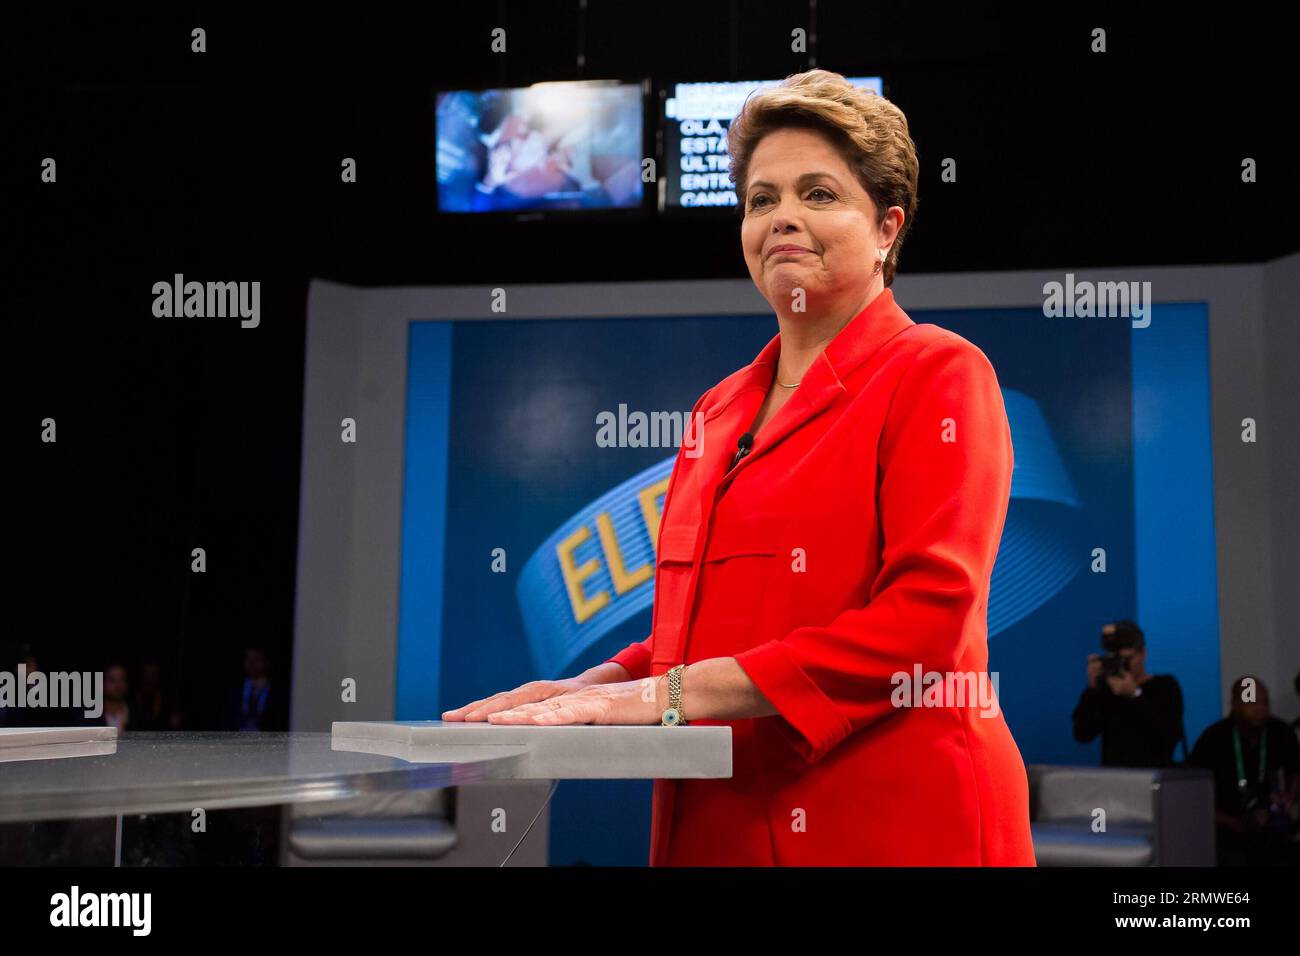 Brazil s President and presidential candidate for the Worker s Party (PT) Dilma Rousseff attends a television debate in Jacarepagua, west of Rio de Janeiro, Brazil, on Oct. 24, 2014. Brazil s presidential election will be defined on a second round, on Oct. 26, between Dilma Rousseff of PT and Aecio Neves of PSDB. Gustavo Serebrenick/Brazil Photo Press/Estadao Conteudo/AGENCIA ESTADO) (zhf) BRAZIL OUT BRAZIL-RIO DE JANEIRO-POLITICS-ELECTIONS AGENCIAxESTADIO PUBLICATIONxNOTxINxCHN   Brazil S President and Presidential Candidate for The Worker S Party PT Dilma Rousseff Attends a Television Debate Stock Photo